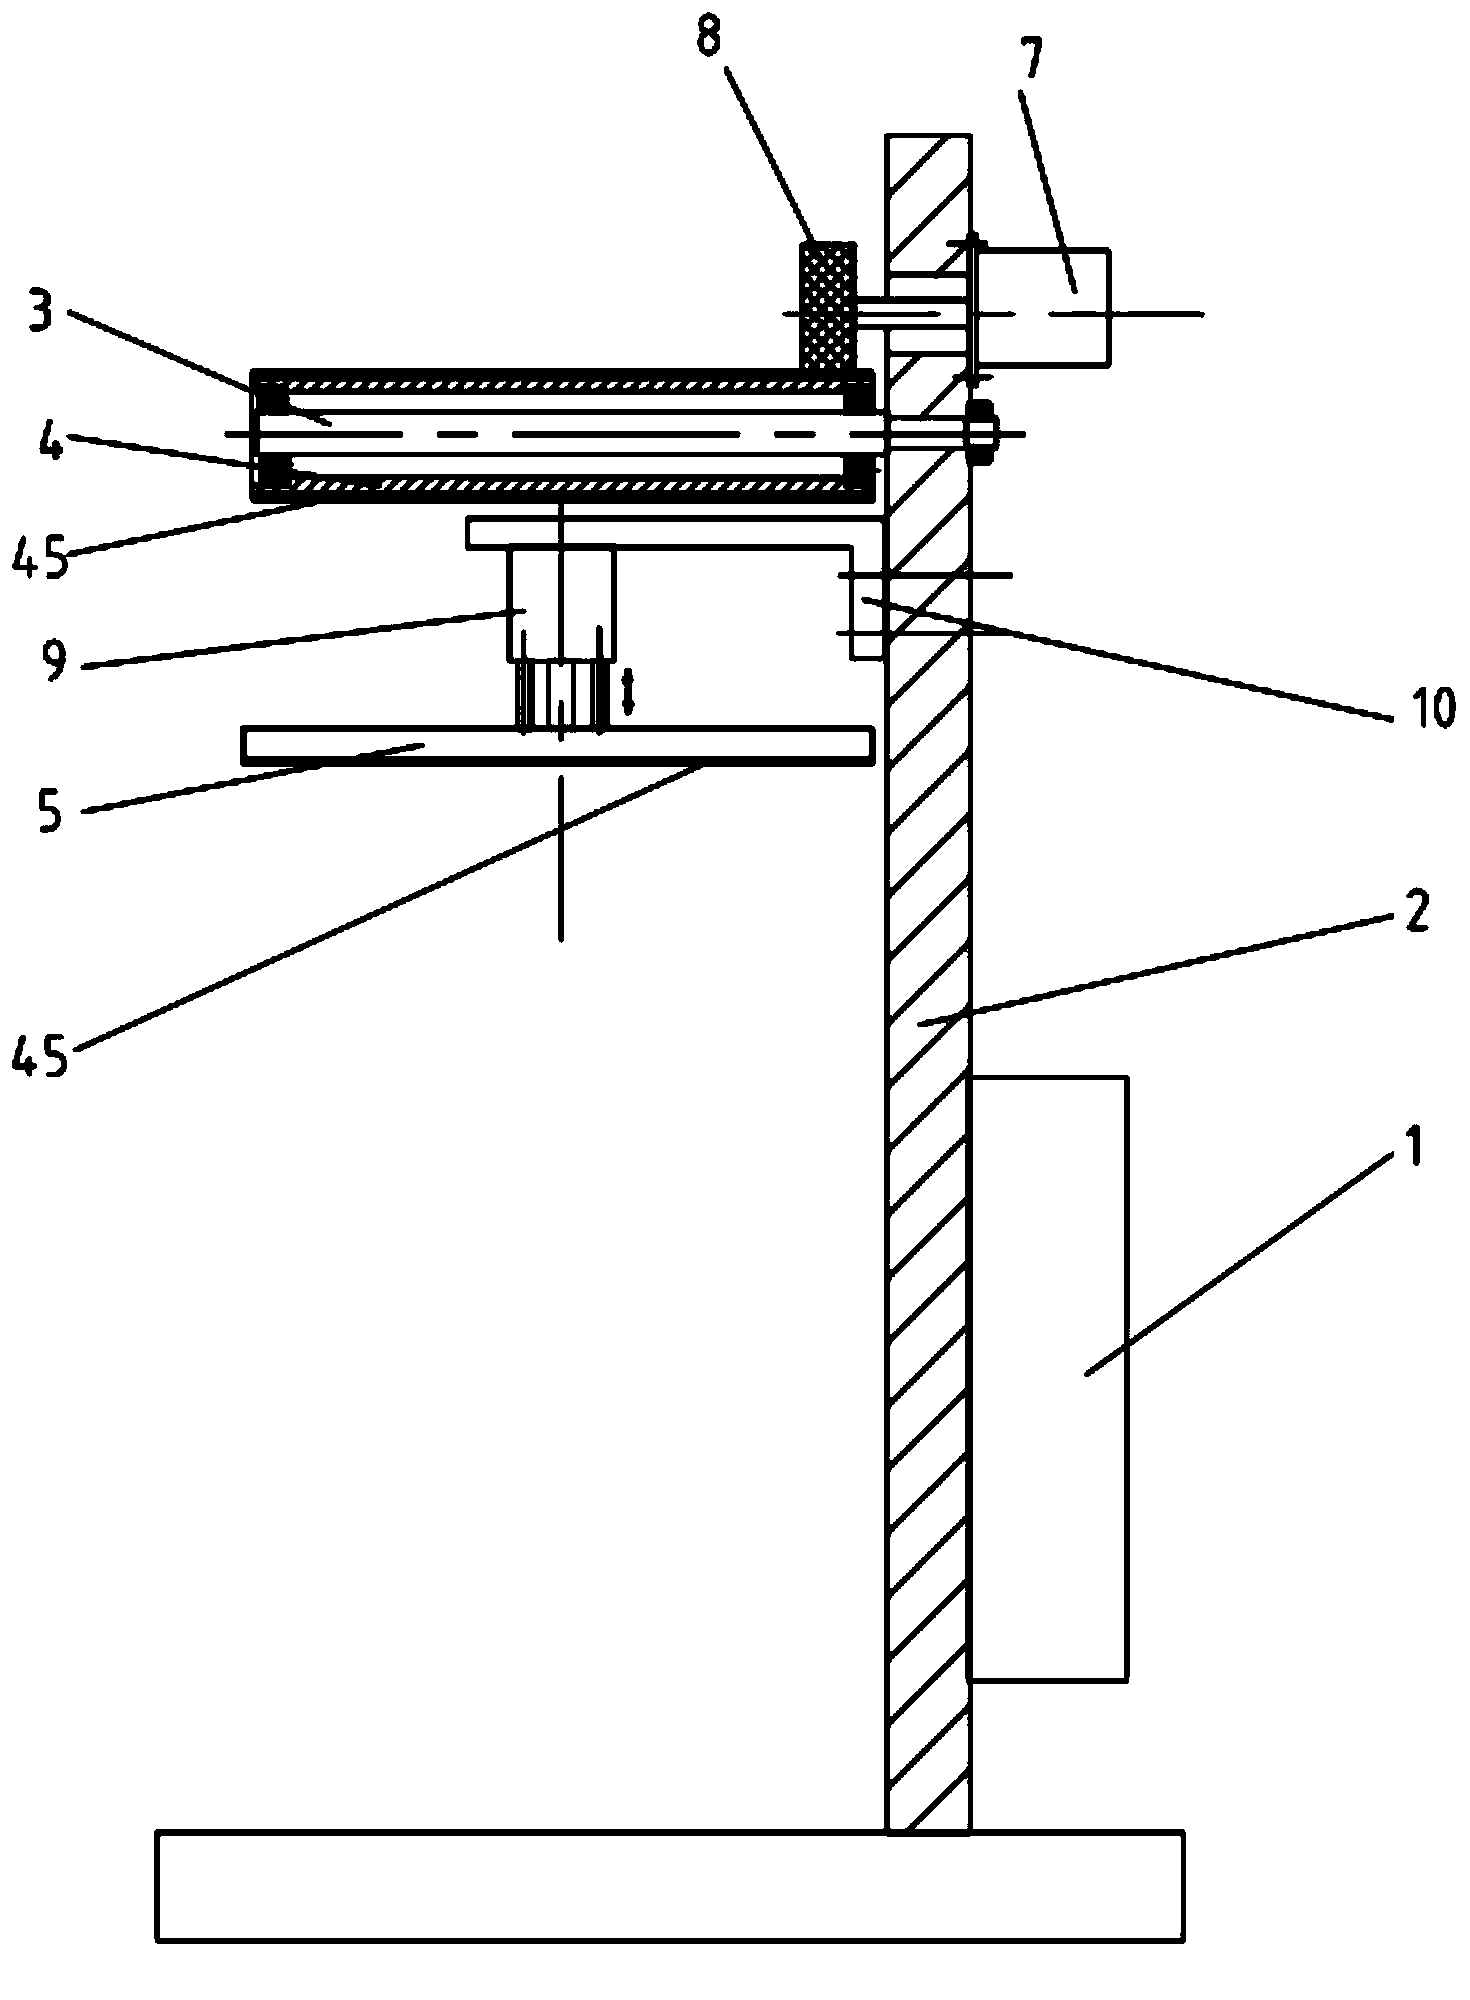 Double-roller frame yarn fluffing device